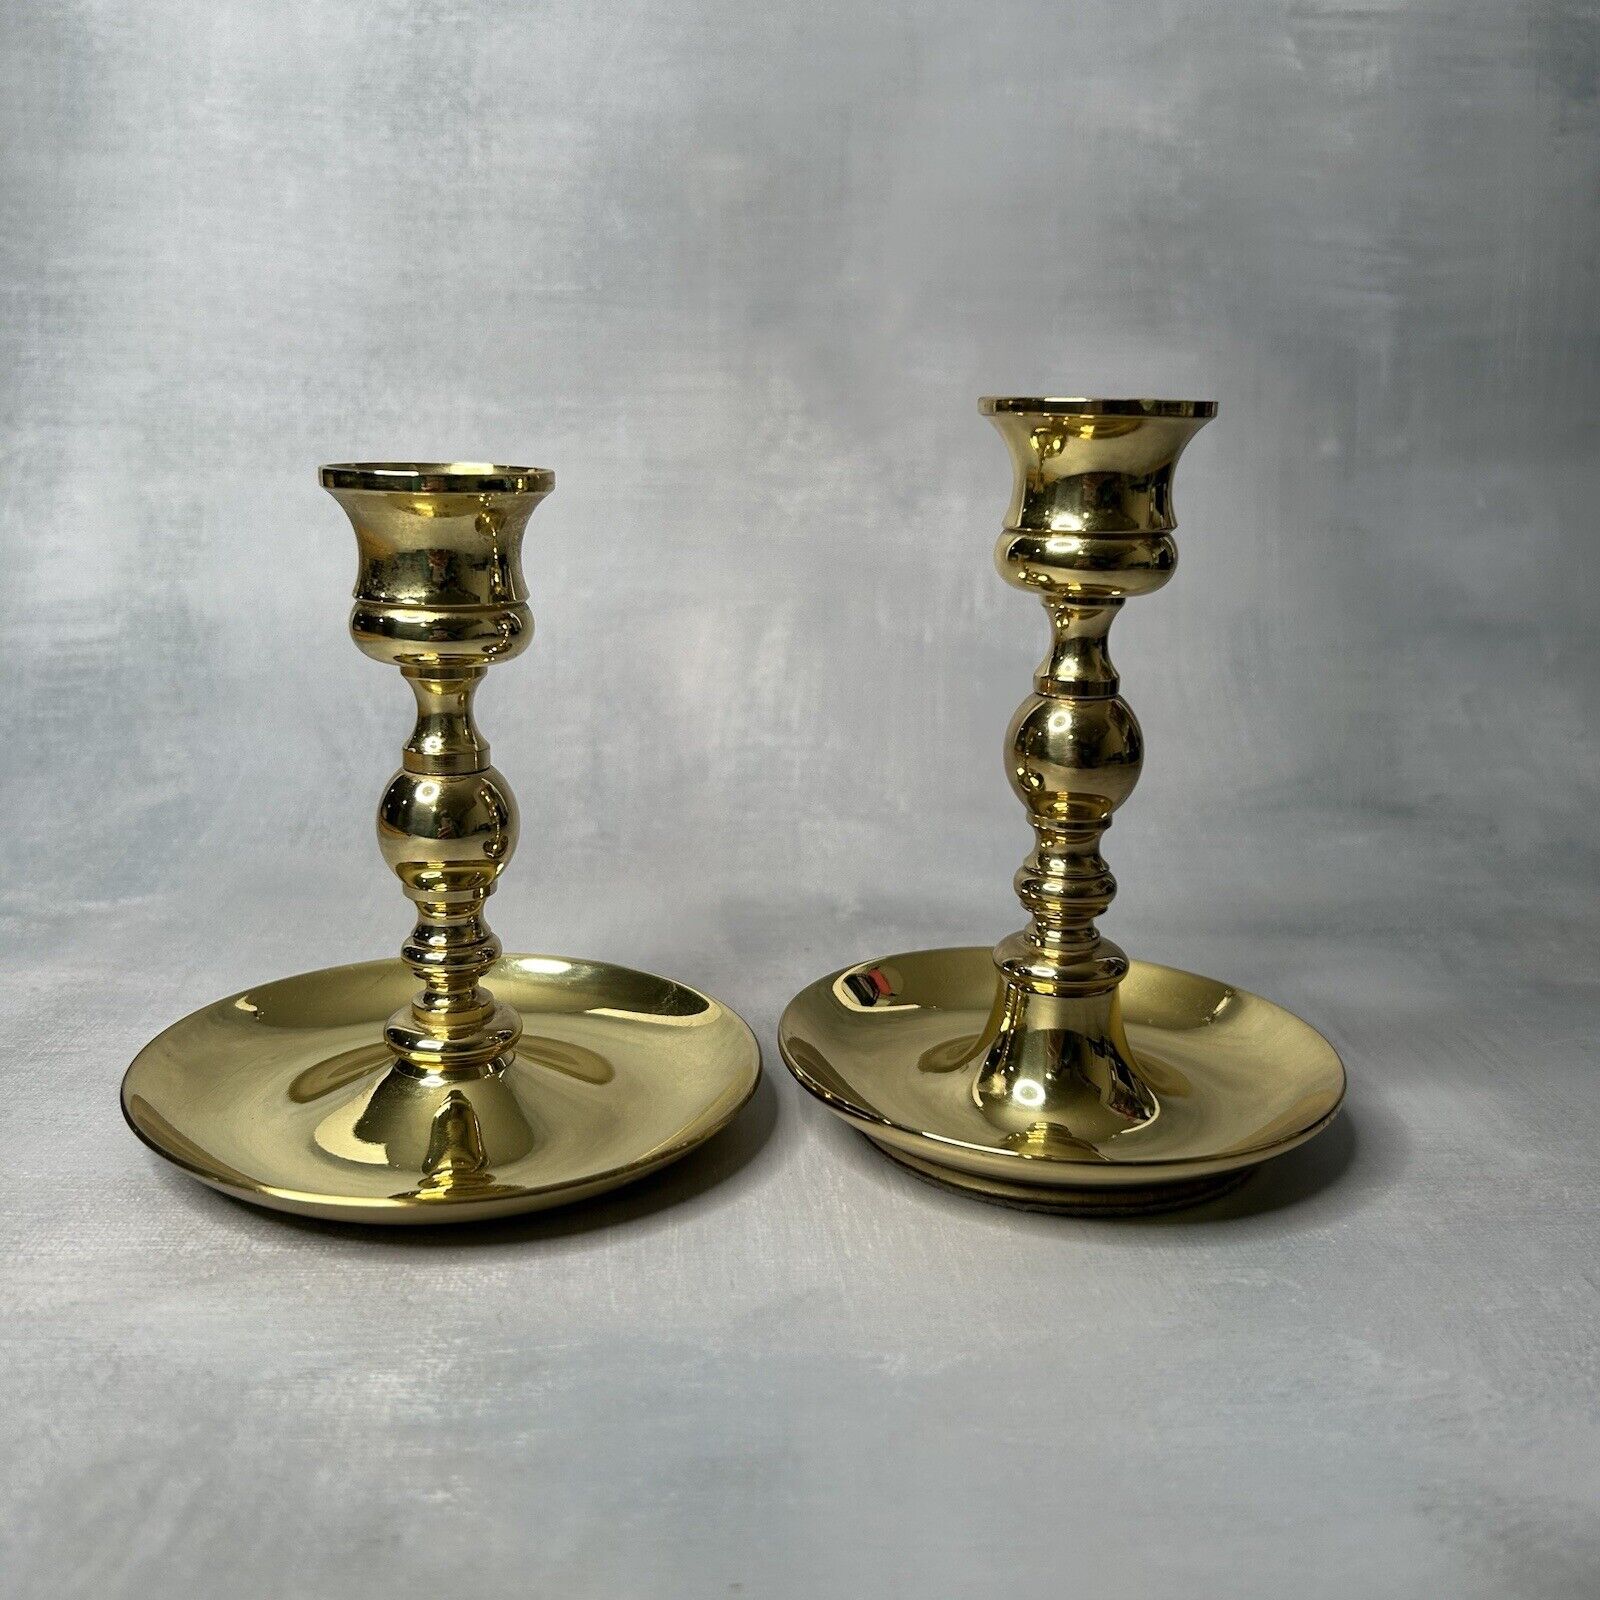 2 Mismatched Baldwin Brass Candlesticks w/ Saucer Base Taper Candle Holders